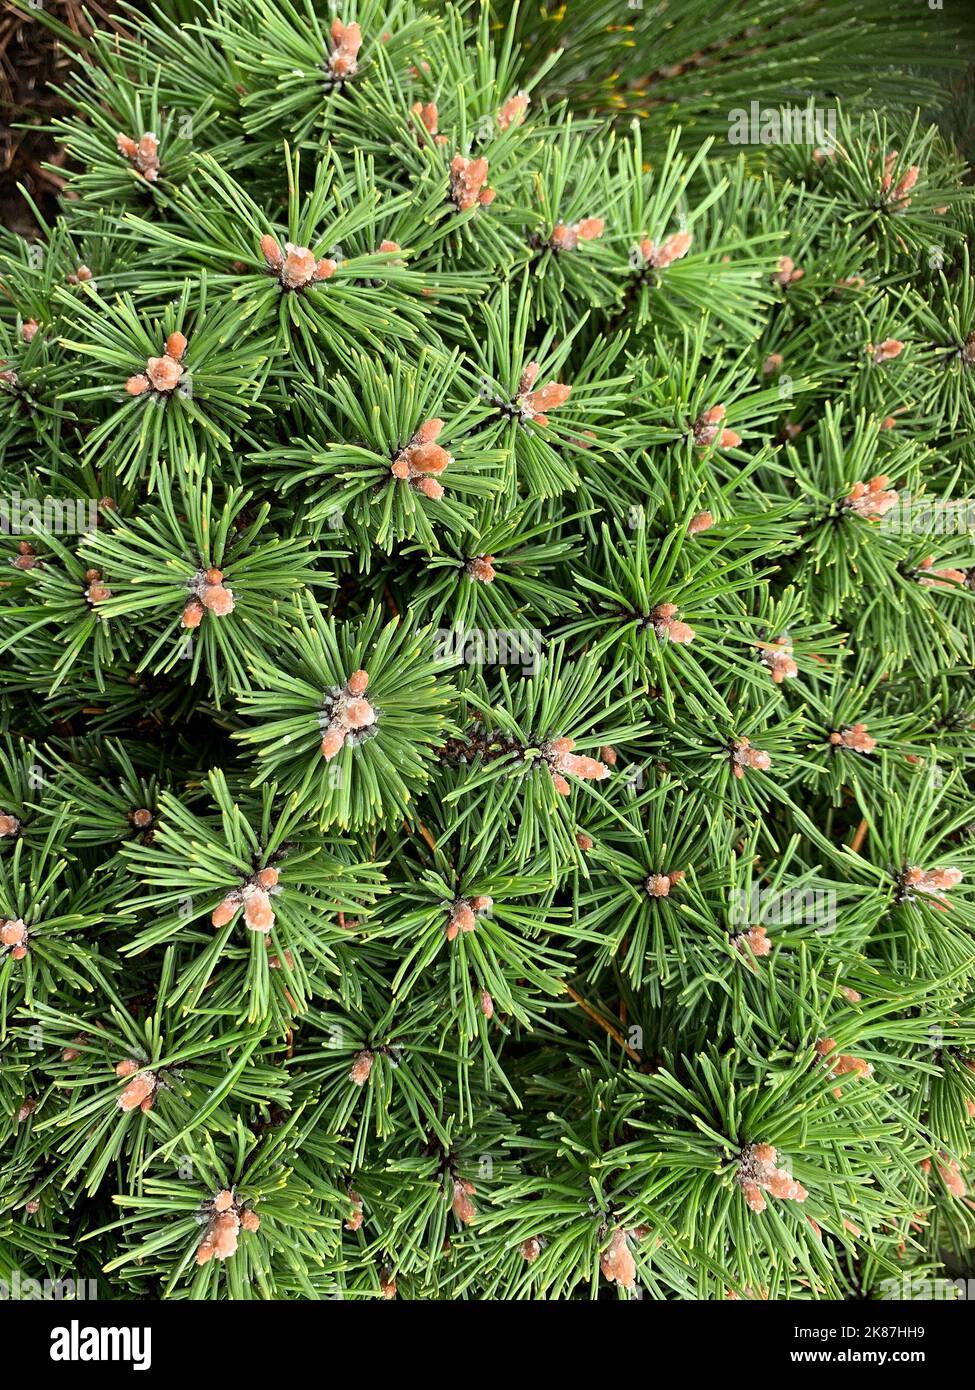 Close up of the dense fine evergreen foliage of the dwarf conifer Pinus mugo Benjamin with resin covered buds. Stock Photo